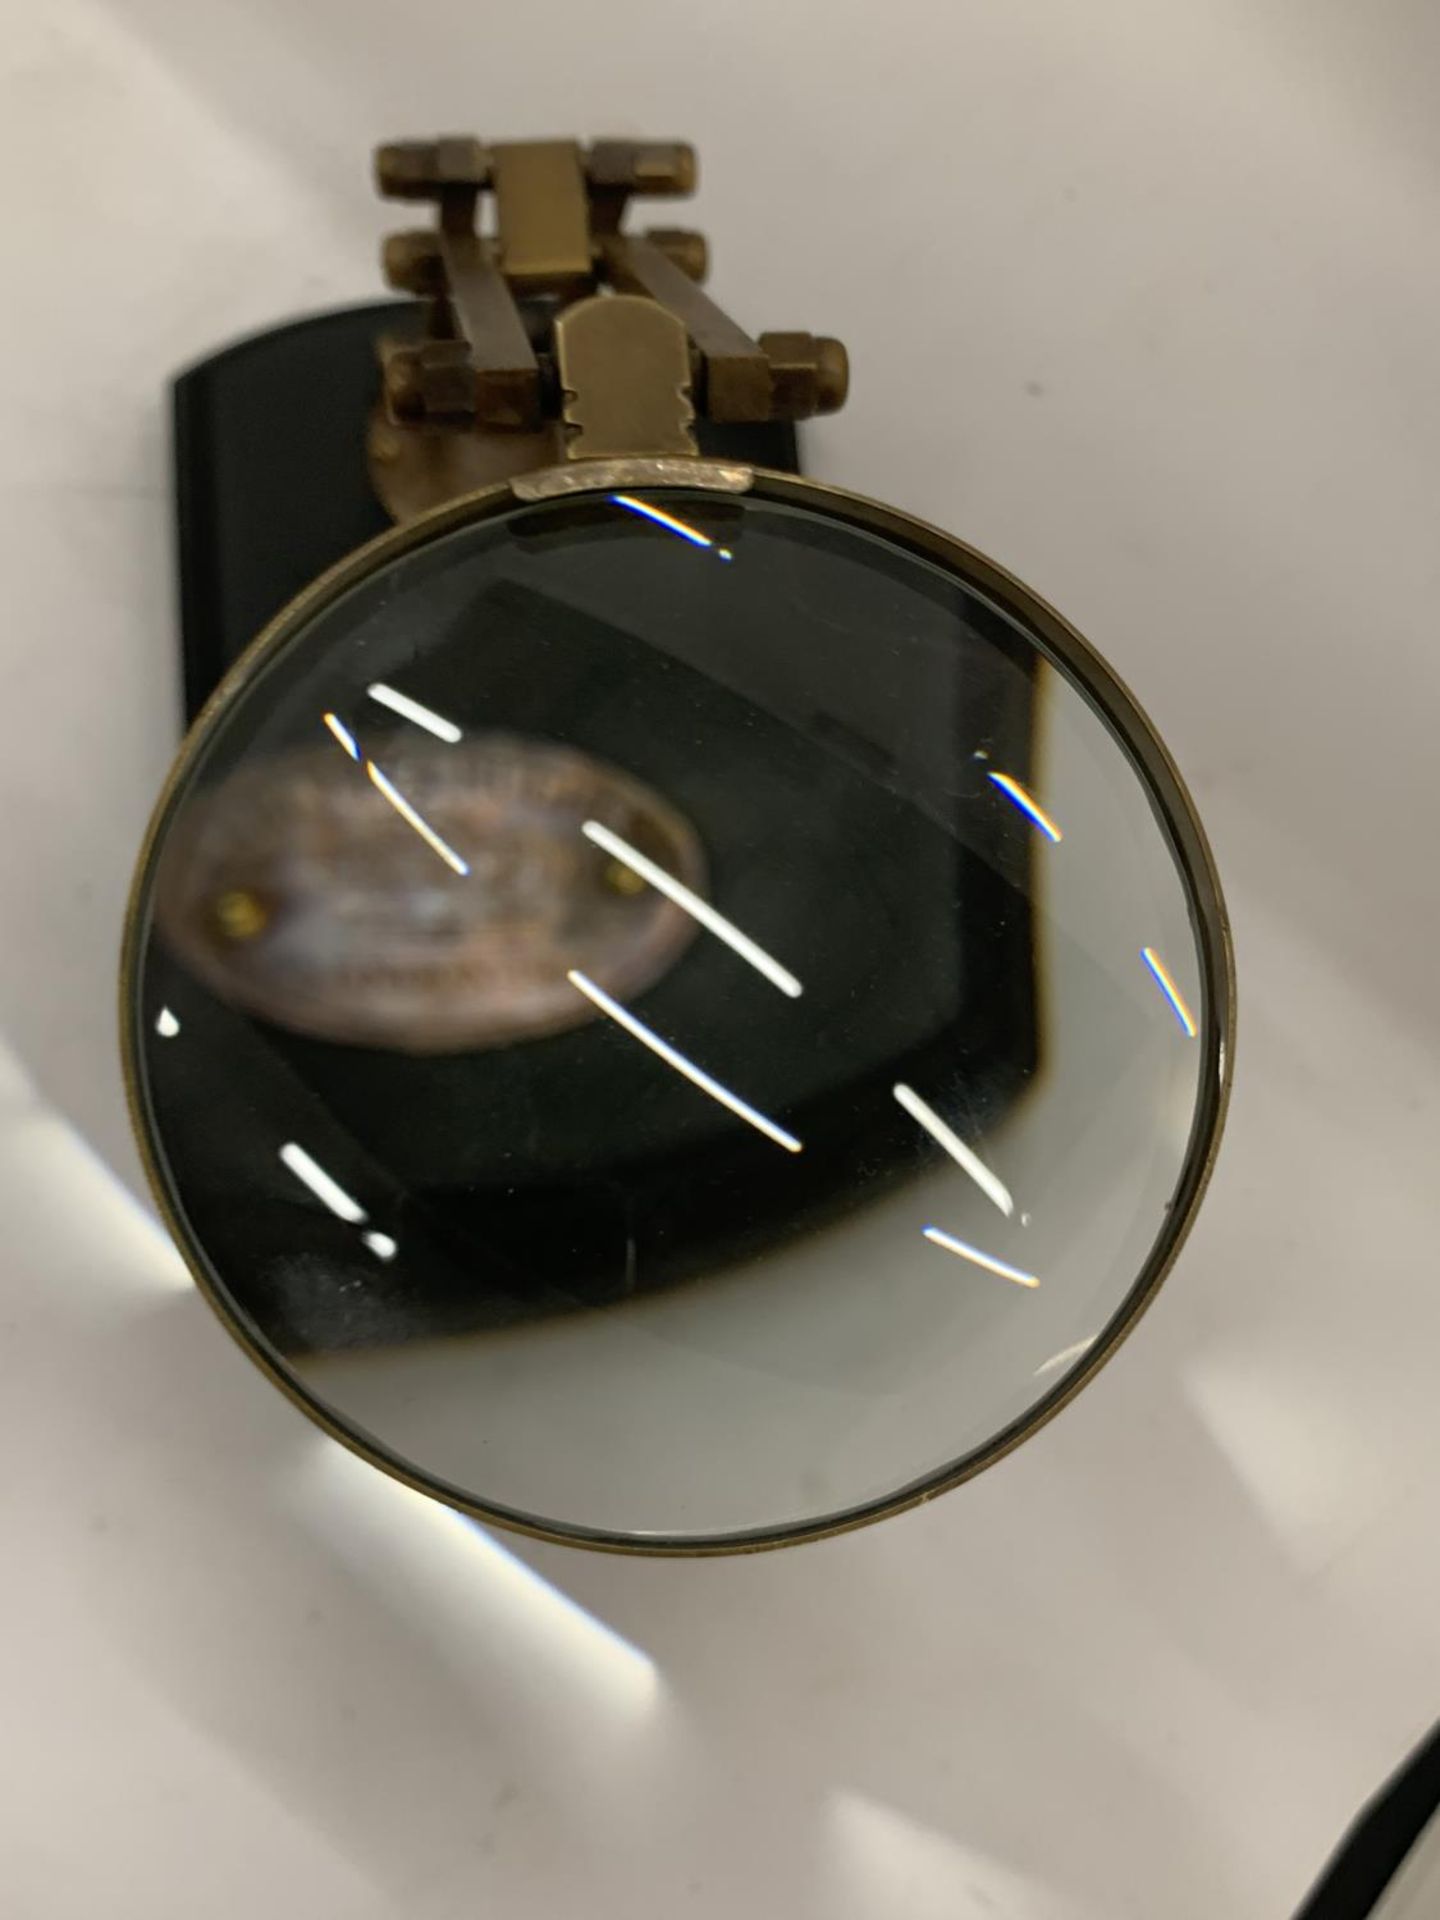 A BRASS MAGNIFYING GLASS ON A WOODEN BASE - Image 4 of 4